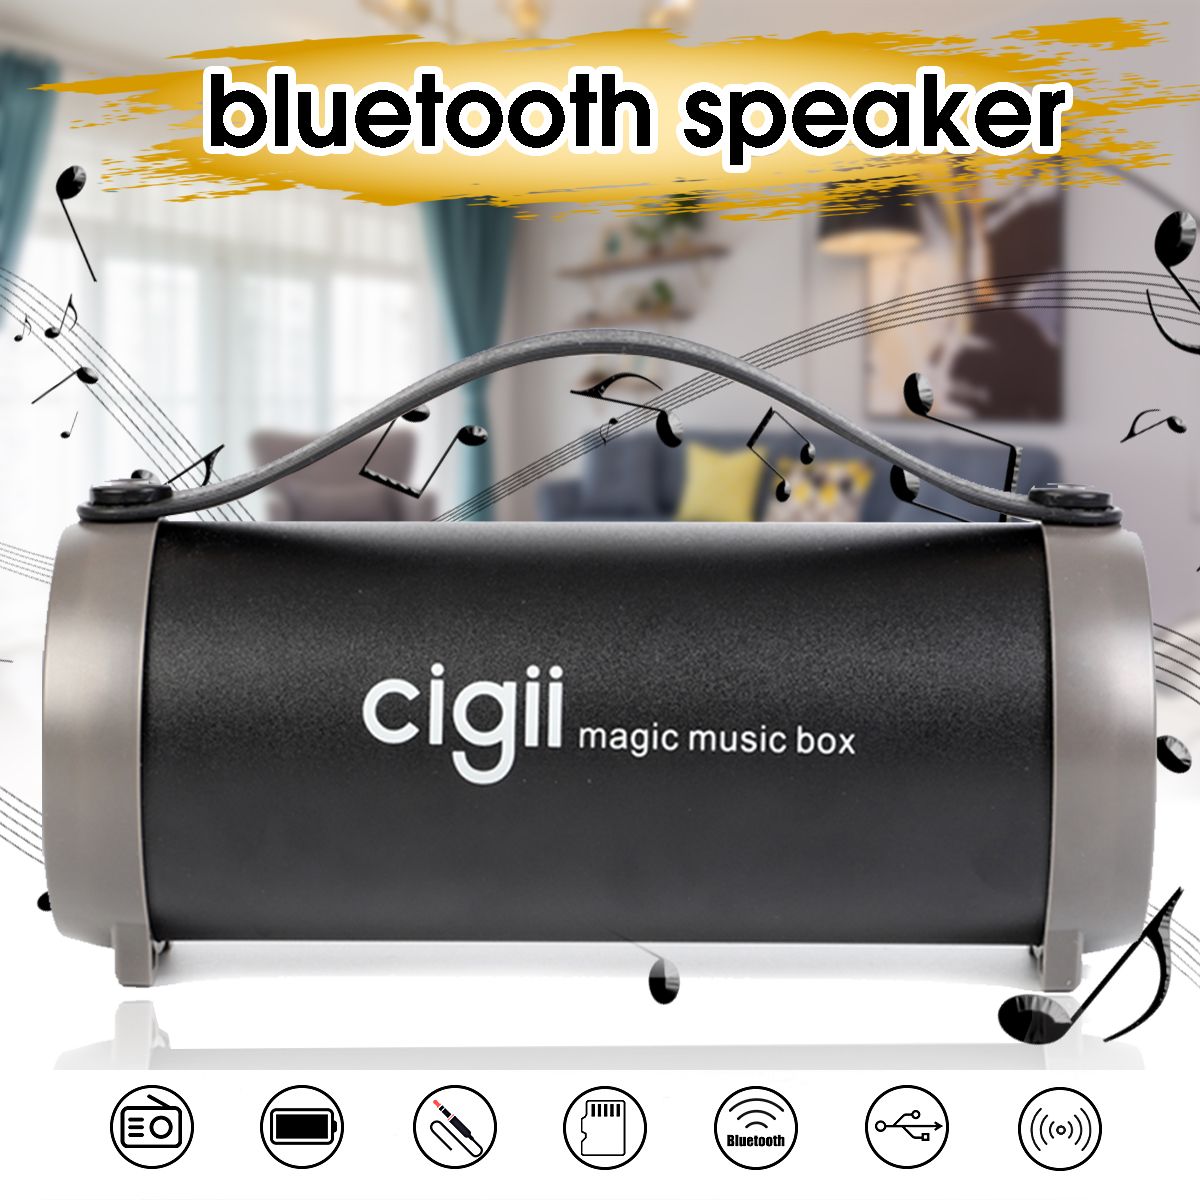 CIGII-S33D-1500mAh-35mm-Wireless-Portable-bluetooth-Speaker-Subwoofer-Noise-Cancelling-Support-FM-Ra-1567073